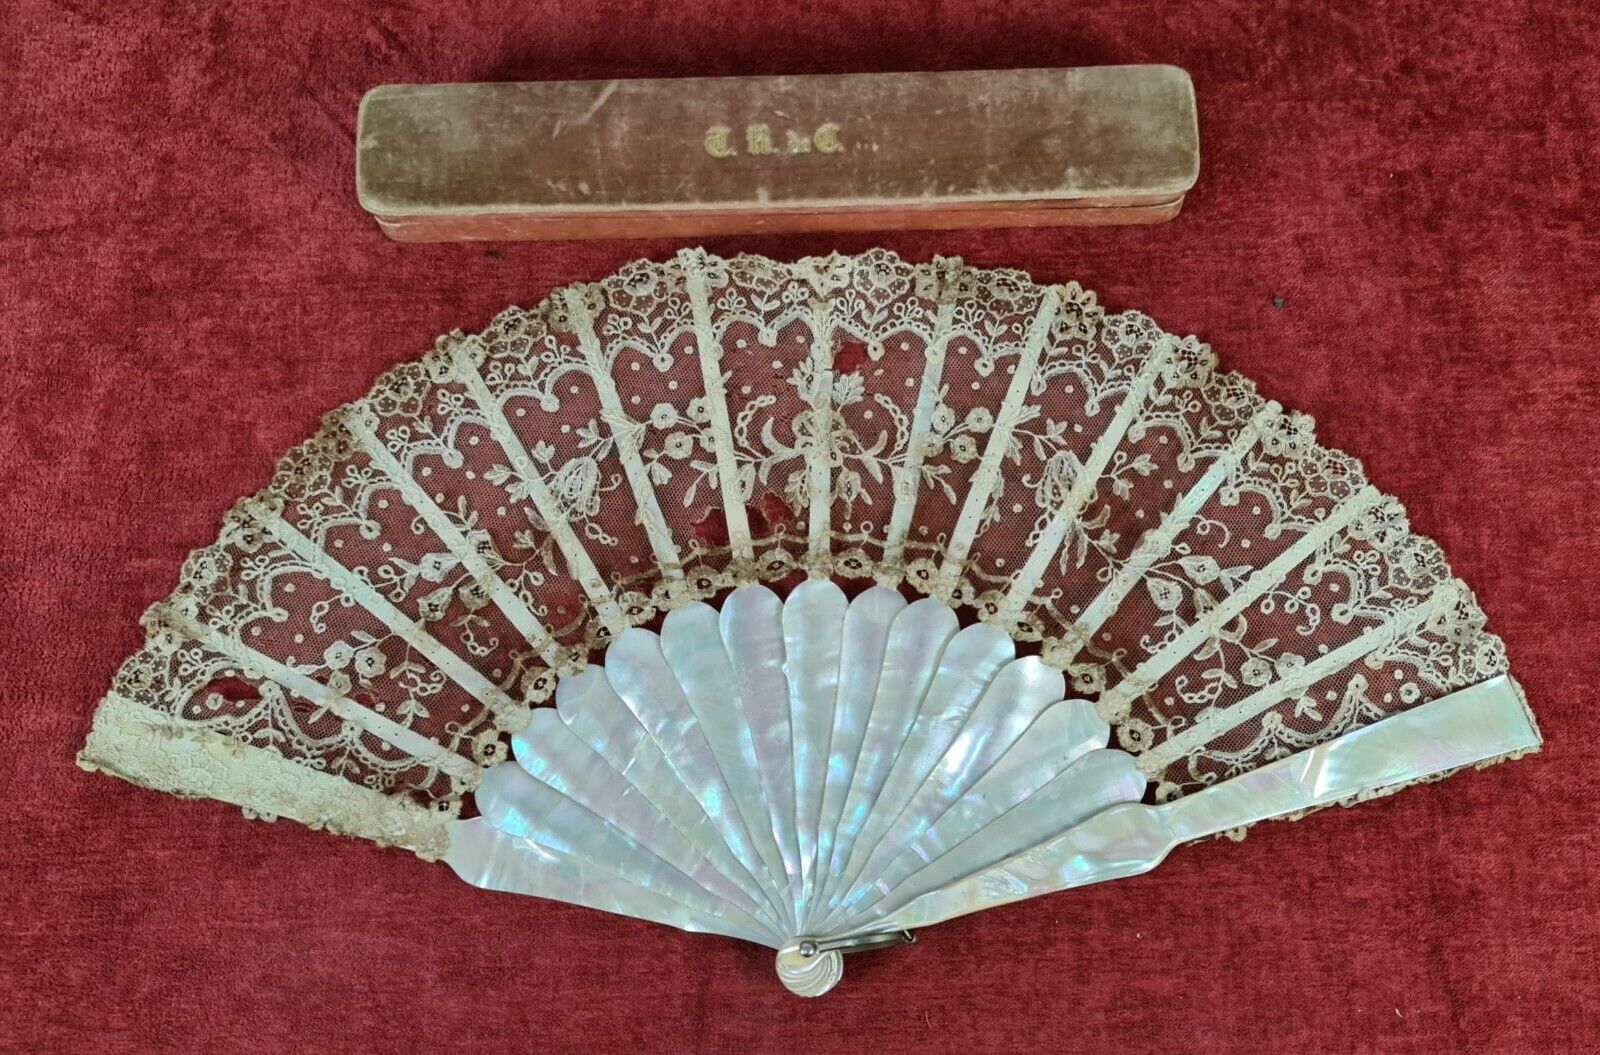 HAND FAN. MOTHER OF PEARL LINKAGE. ENGLISH LACE. FRANCE. XIX CENTURY